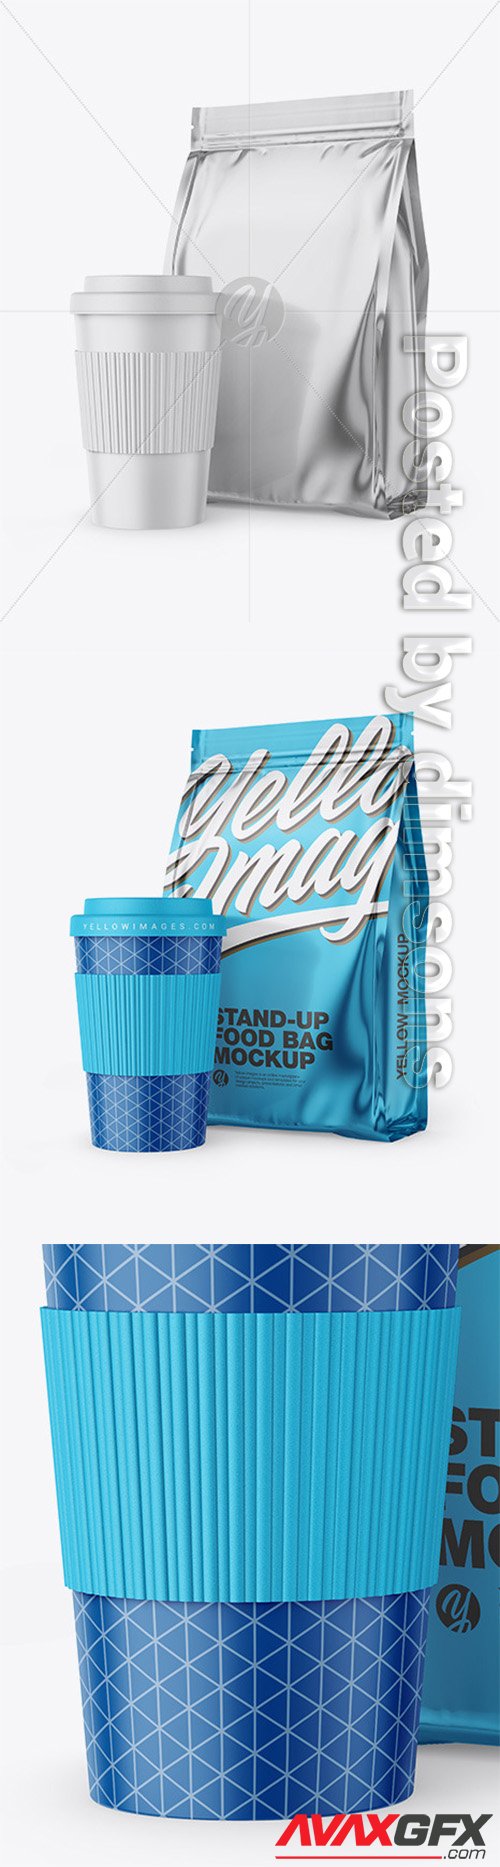 Download Matte Stand Up Bag With Coffee Mug Mockup 66582 Avaxgfx All Downloads That You Need In One Place Graphic From Nitroflare Rapidgator PSD Mockup Templates